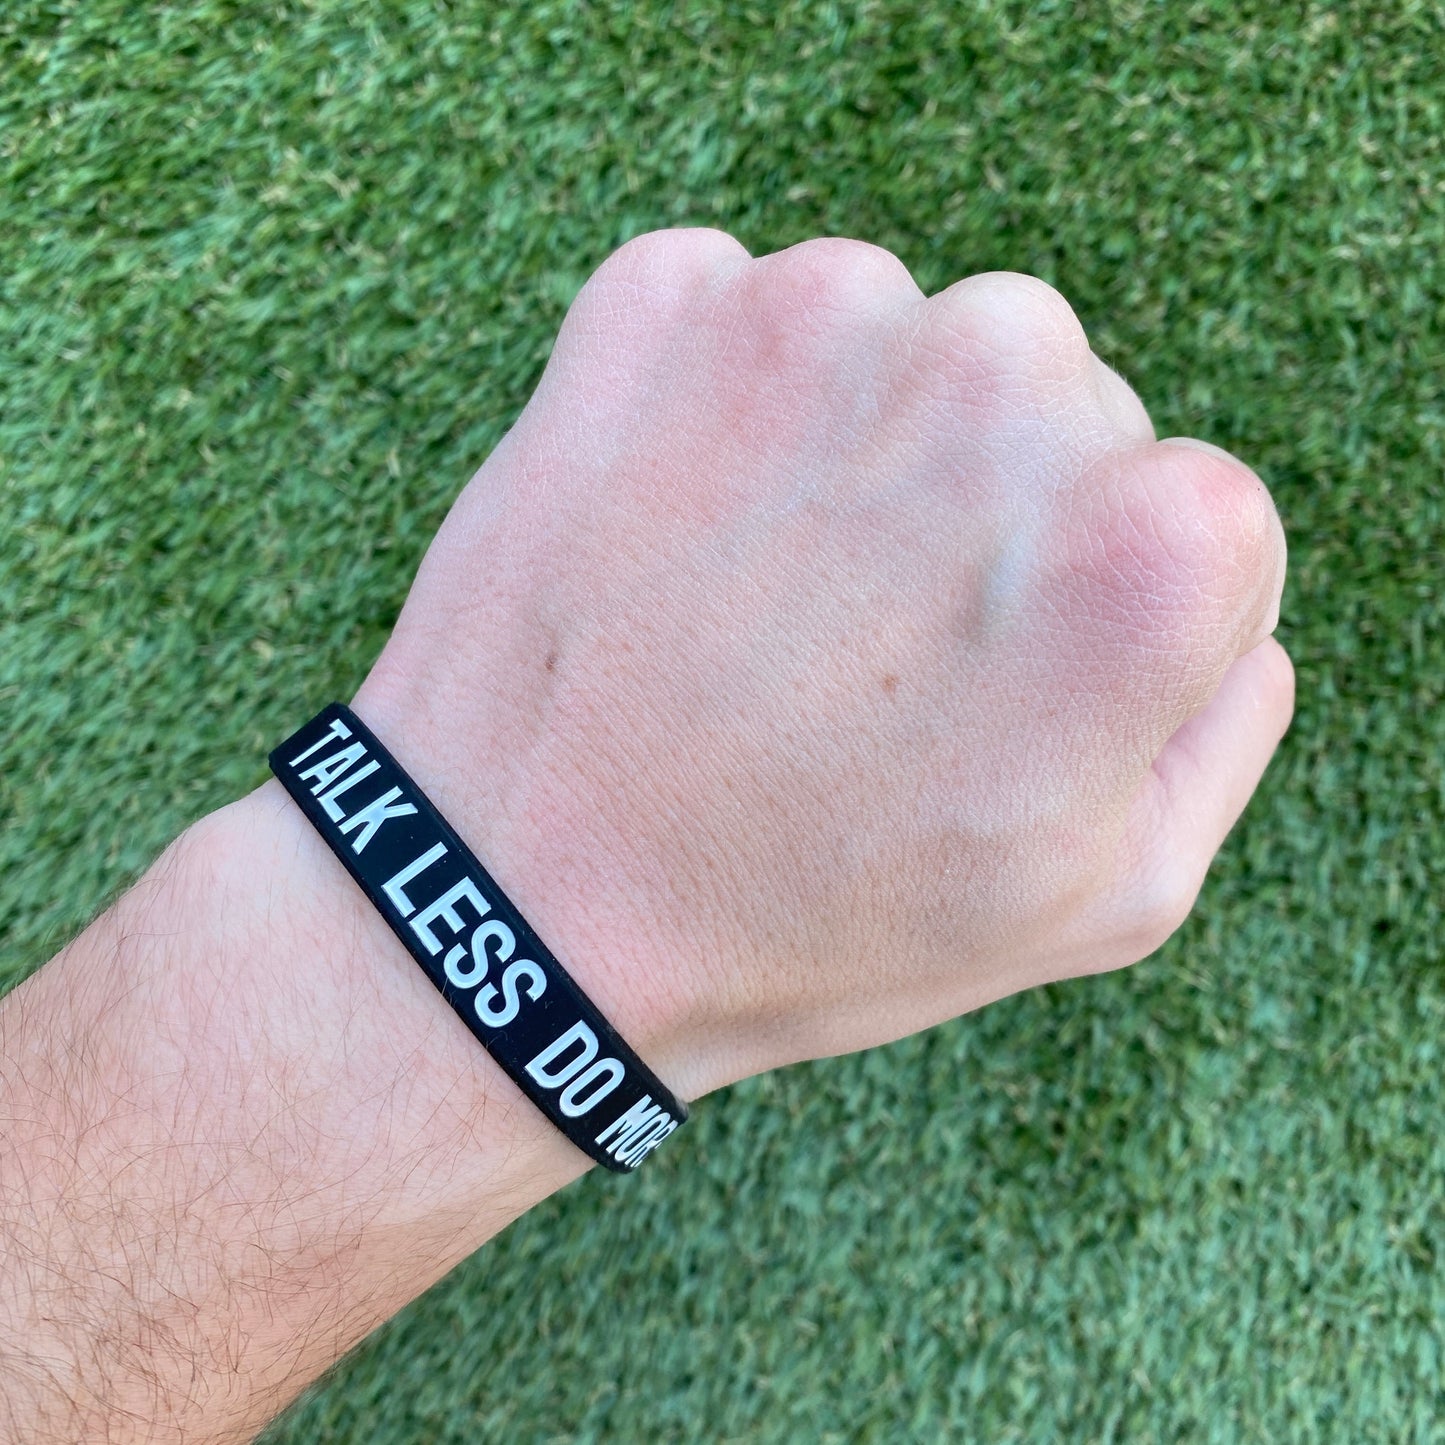 TALK LESS DO MORE Wristband - Southern Grace Creations